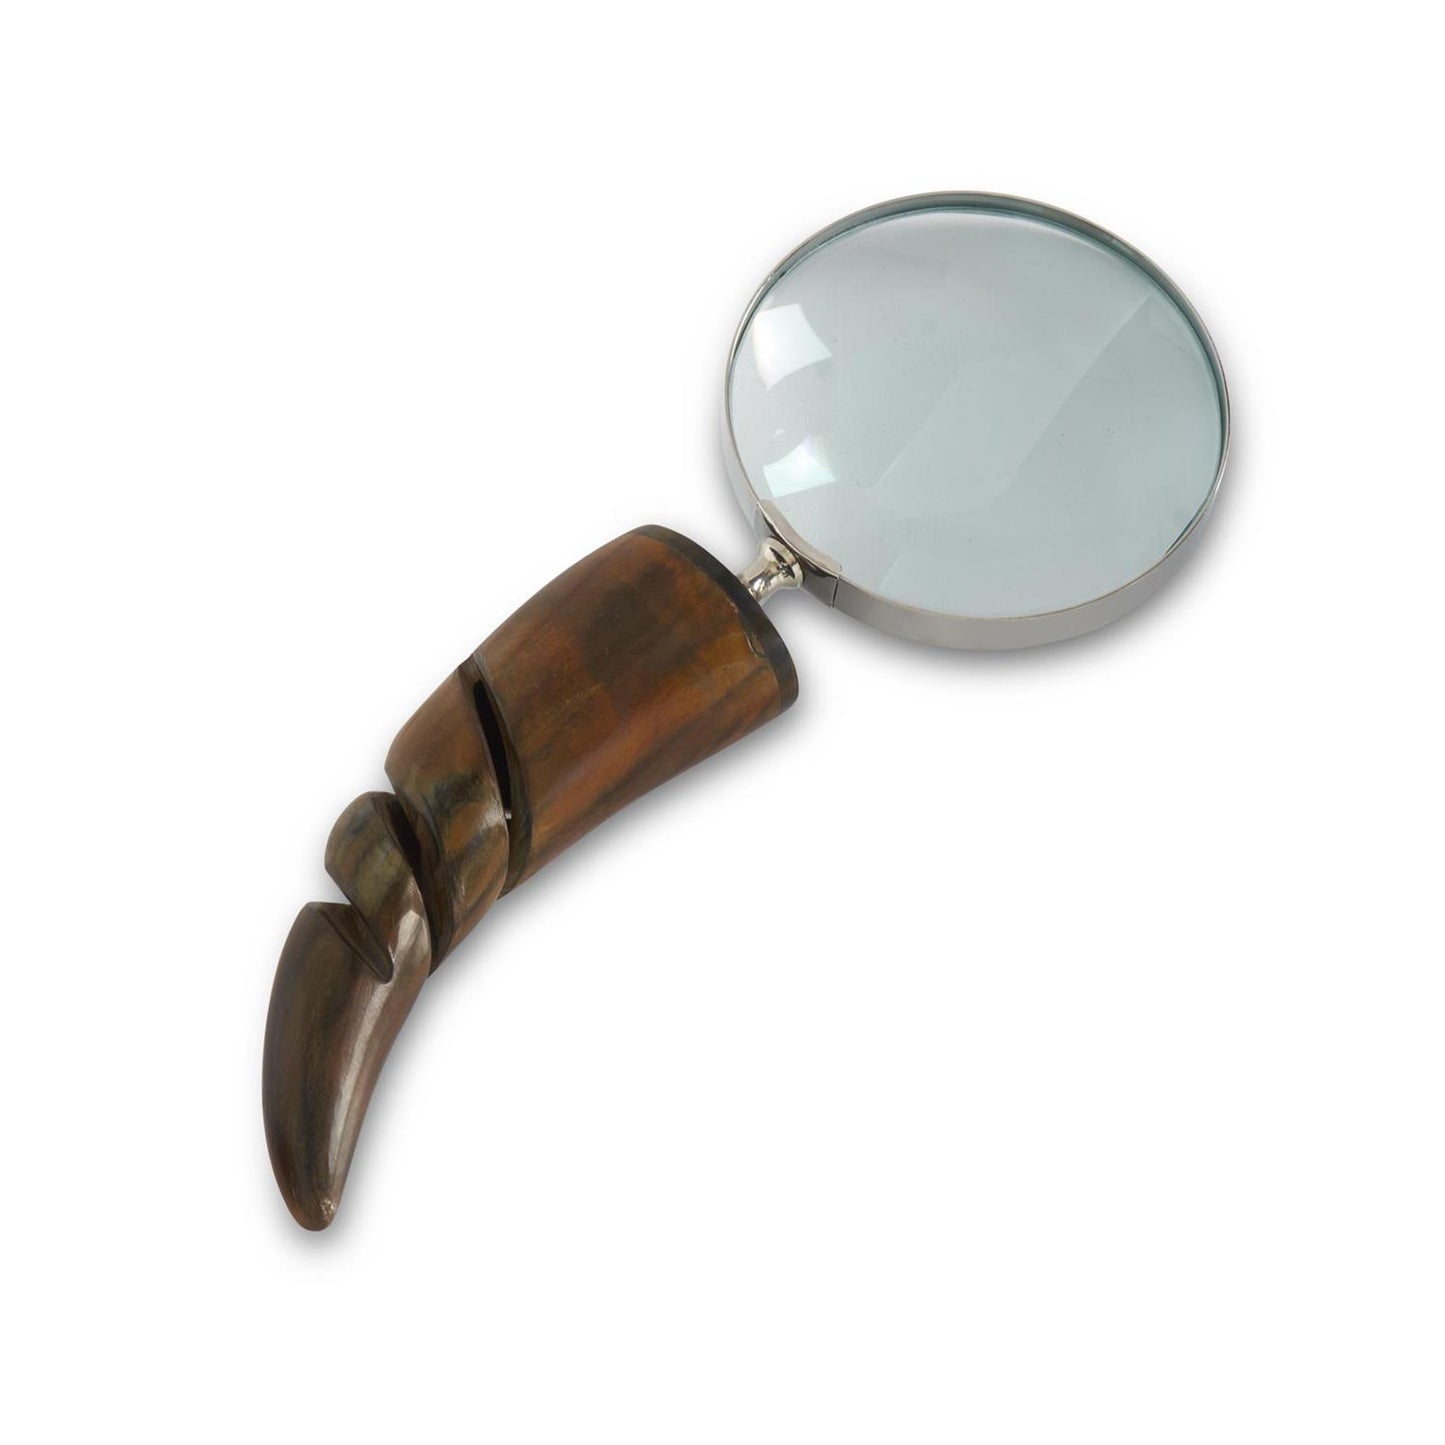 Horn Handle Magnifying Glass